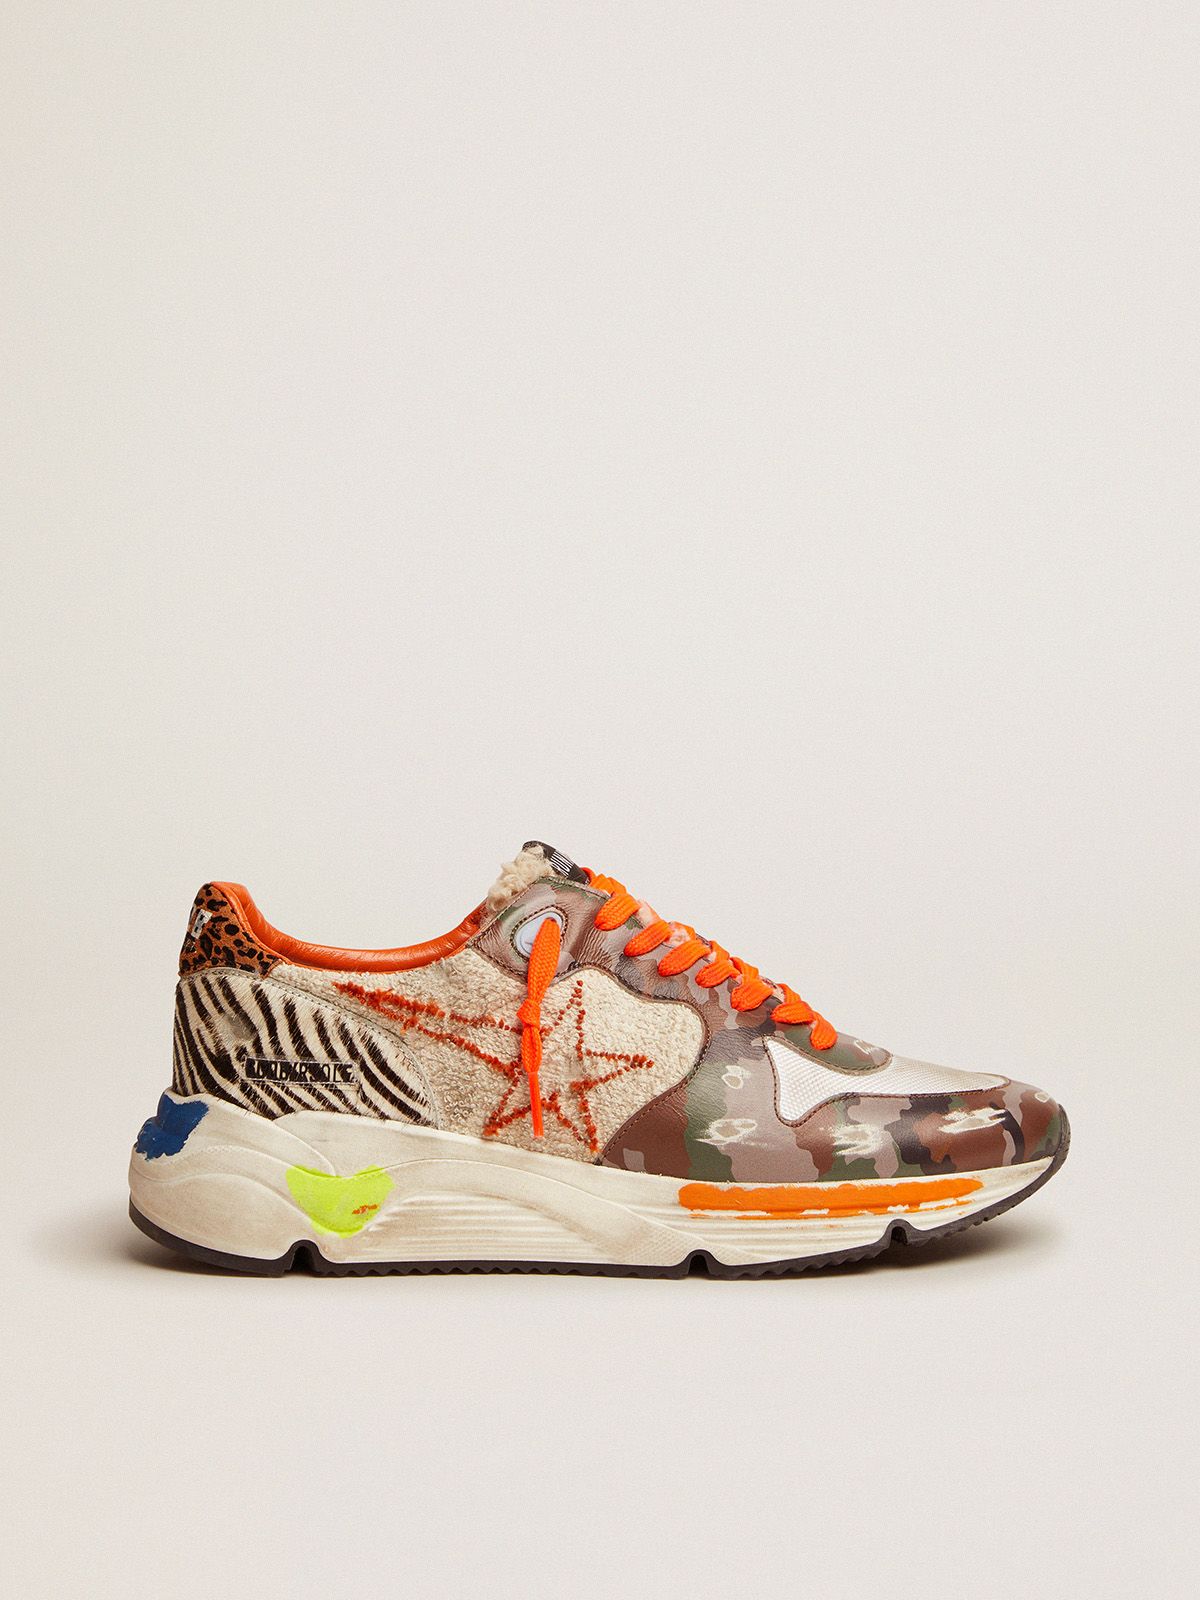 golden goose Running Sole sneakers multi-print upper with